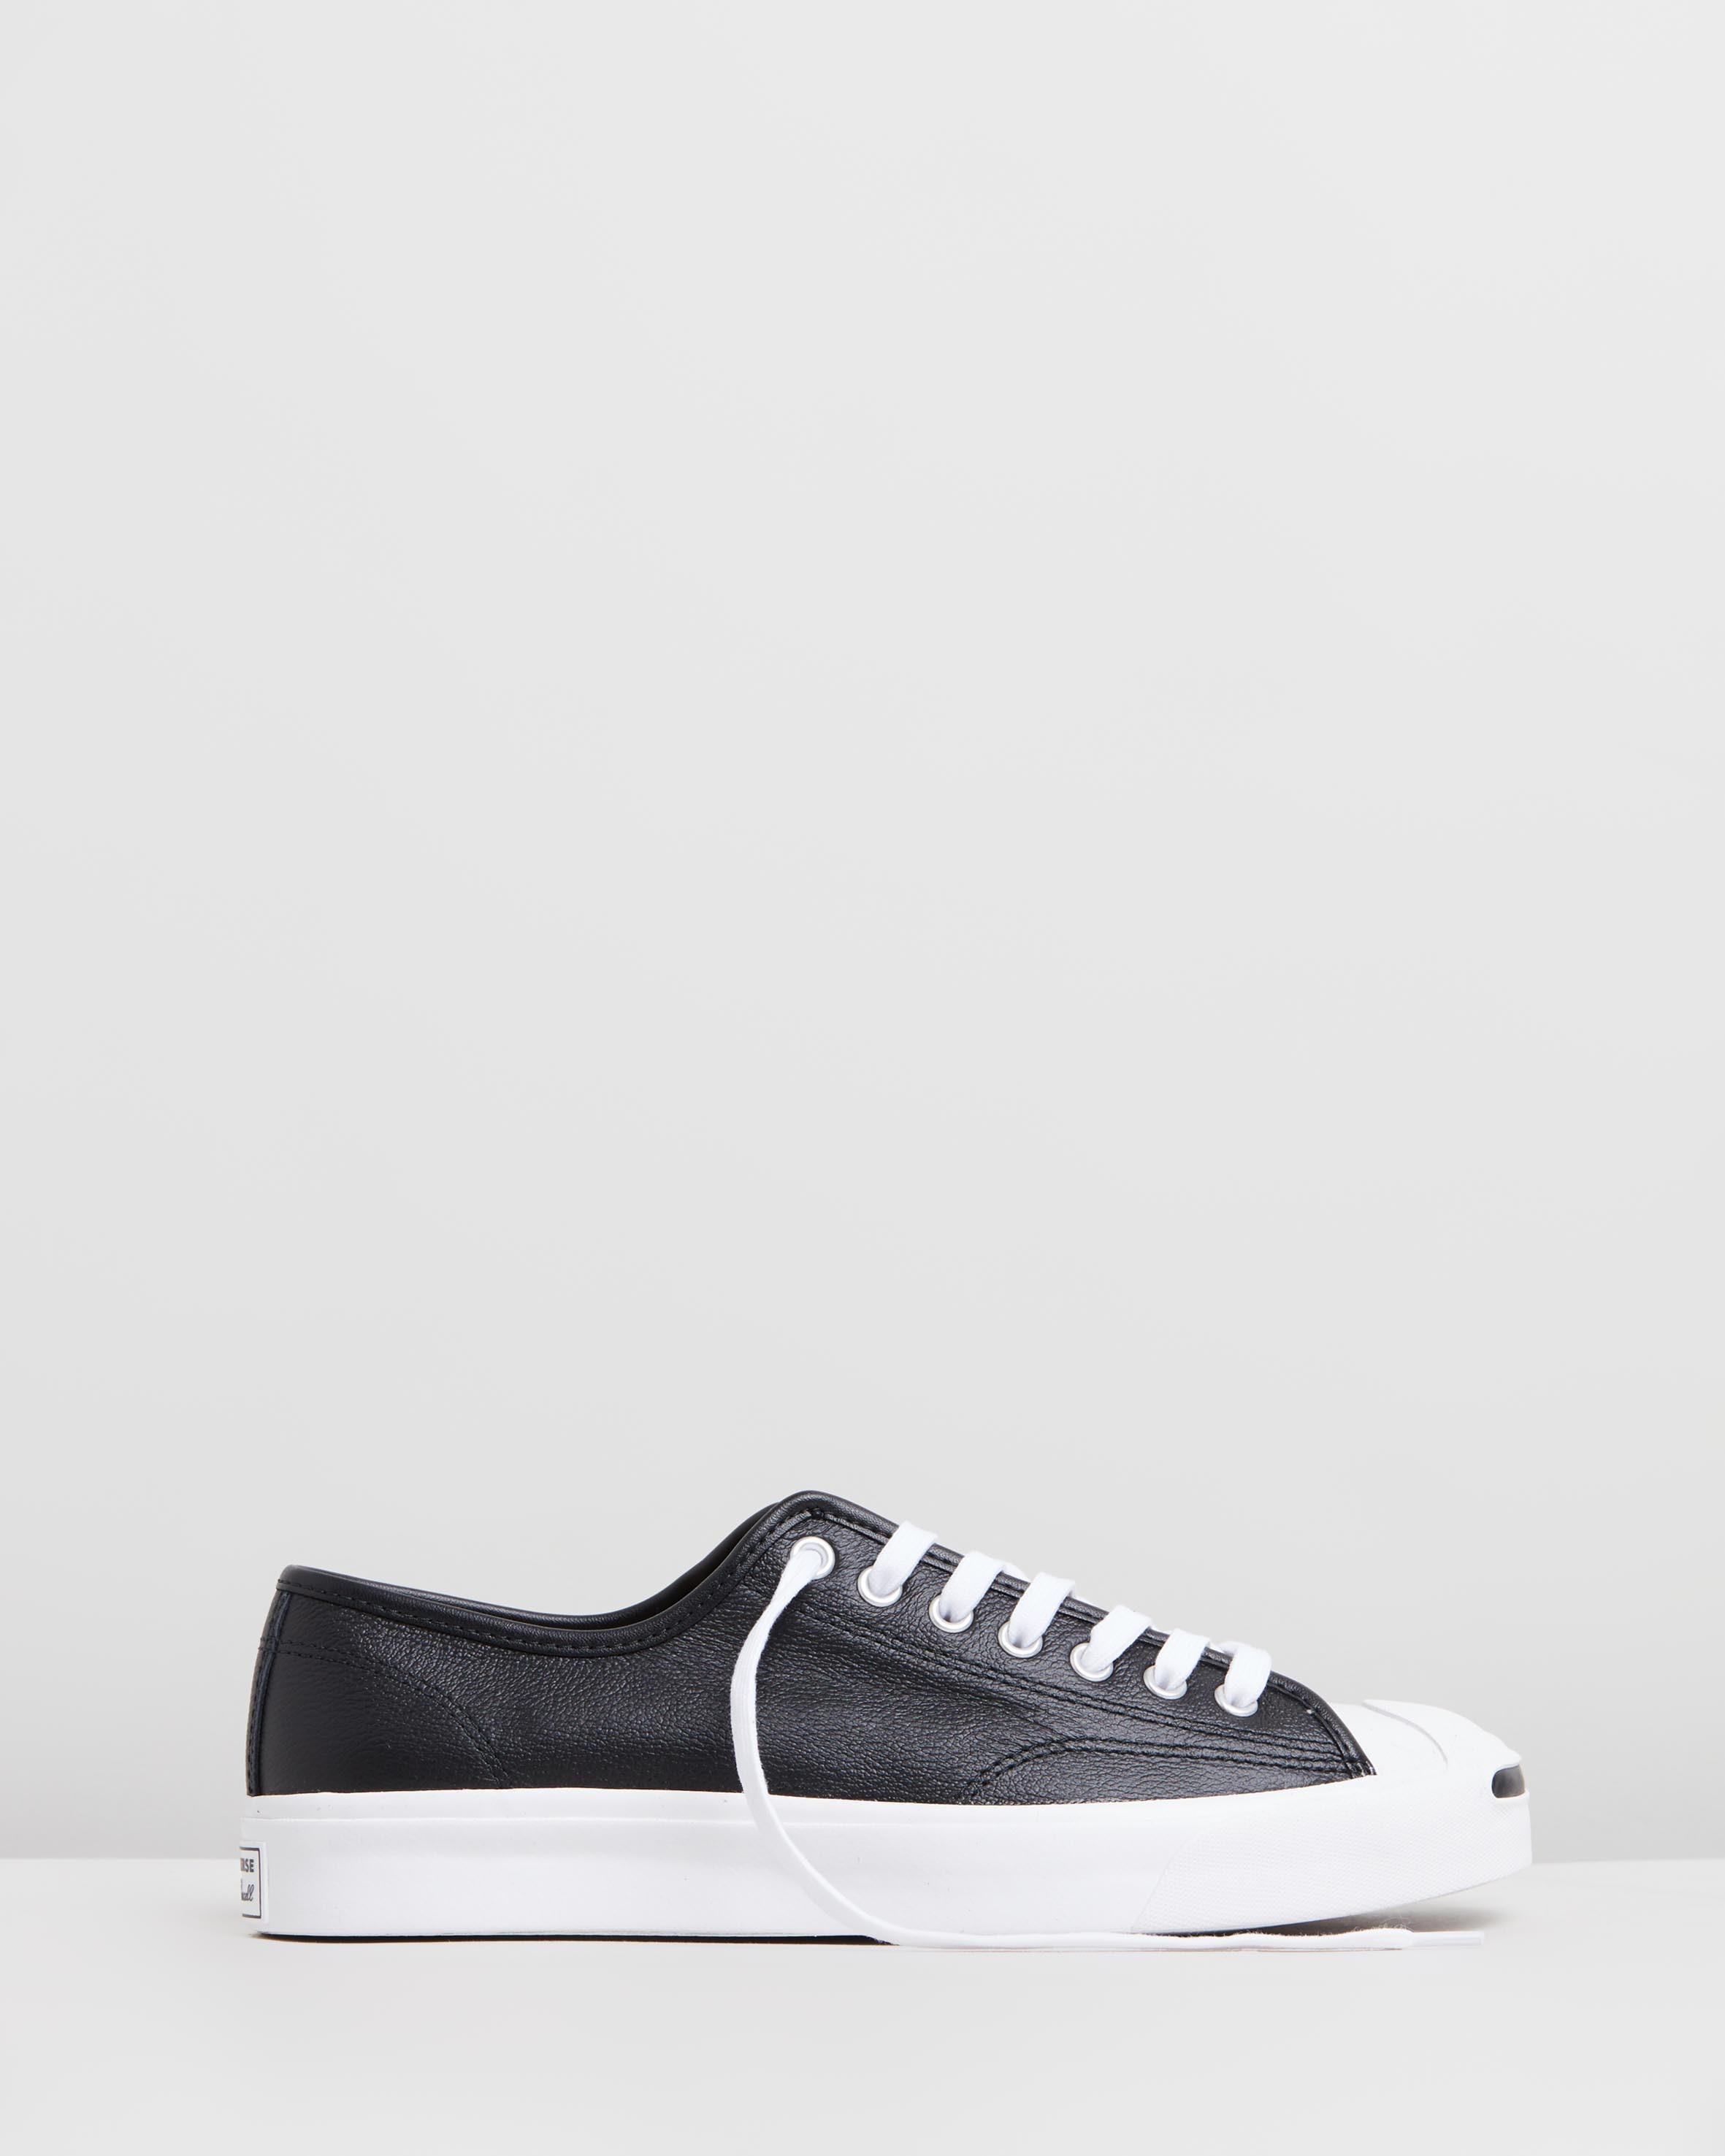 Jack Purcell Sneakers - Unisex Black & White by Converse | ShoeSales